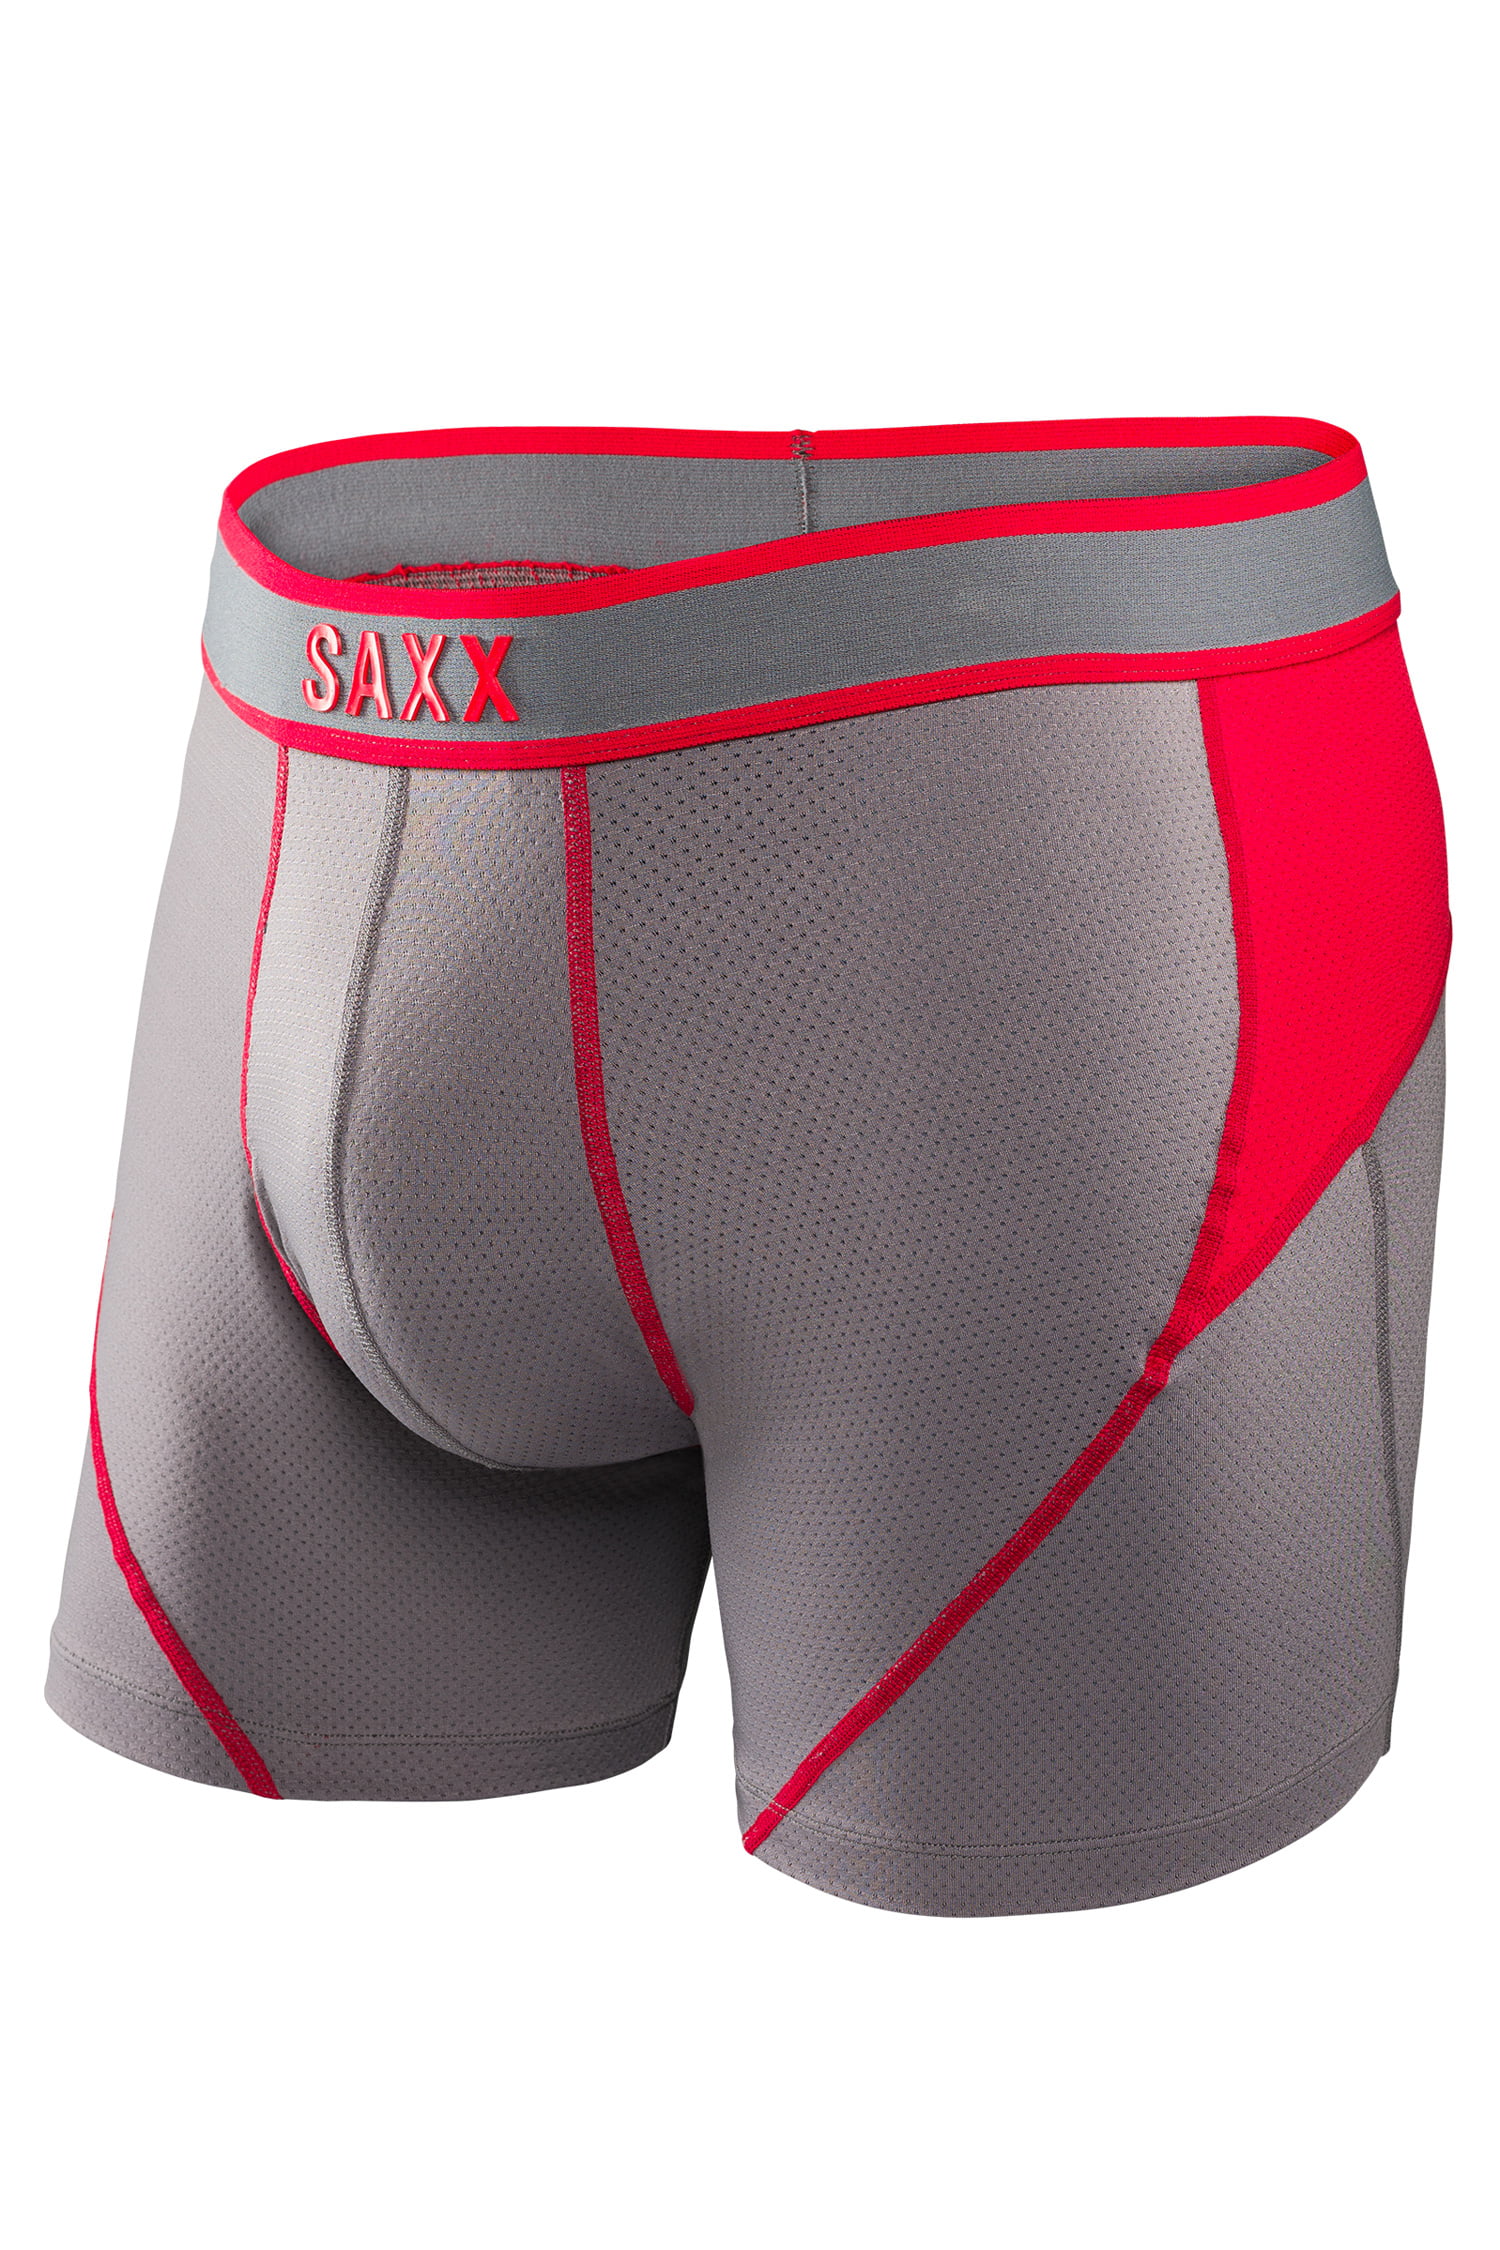 Saxx Mens Kinetic Performance Boxers Underwear Small Rock/Red 